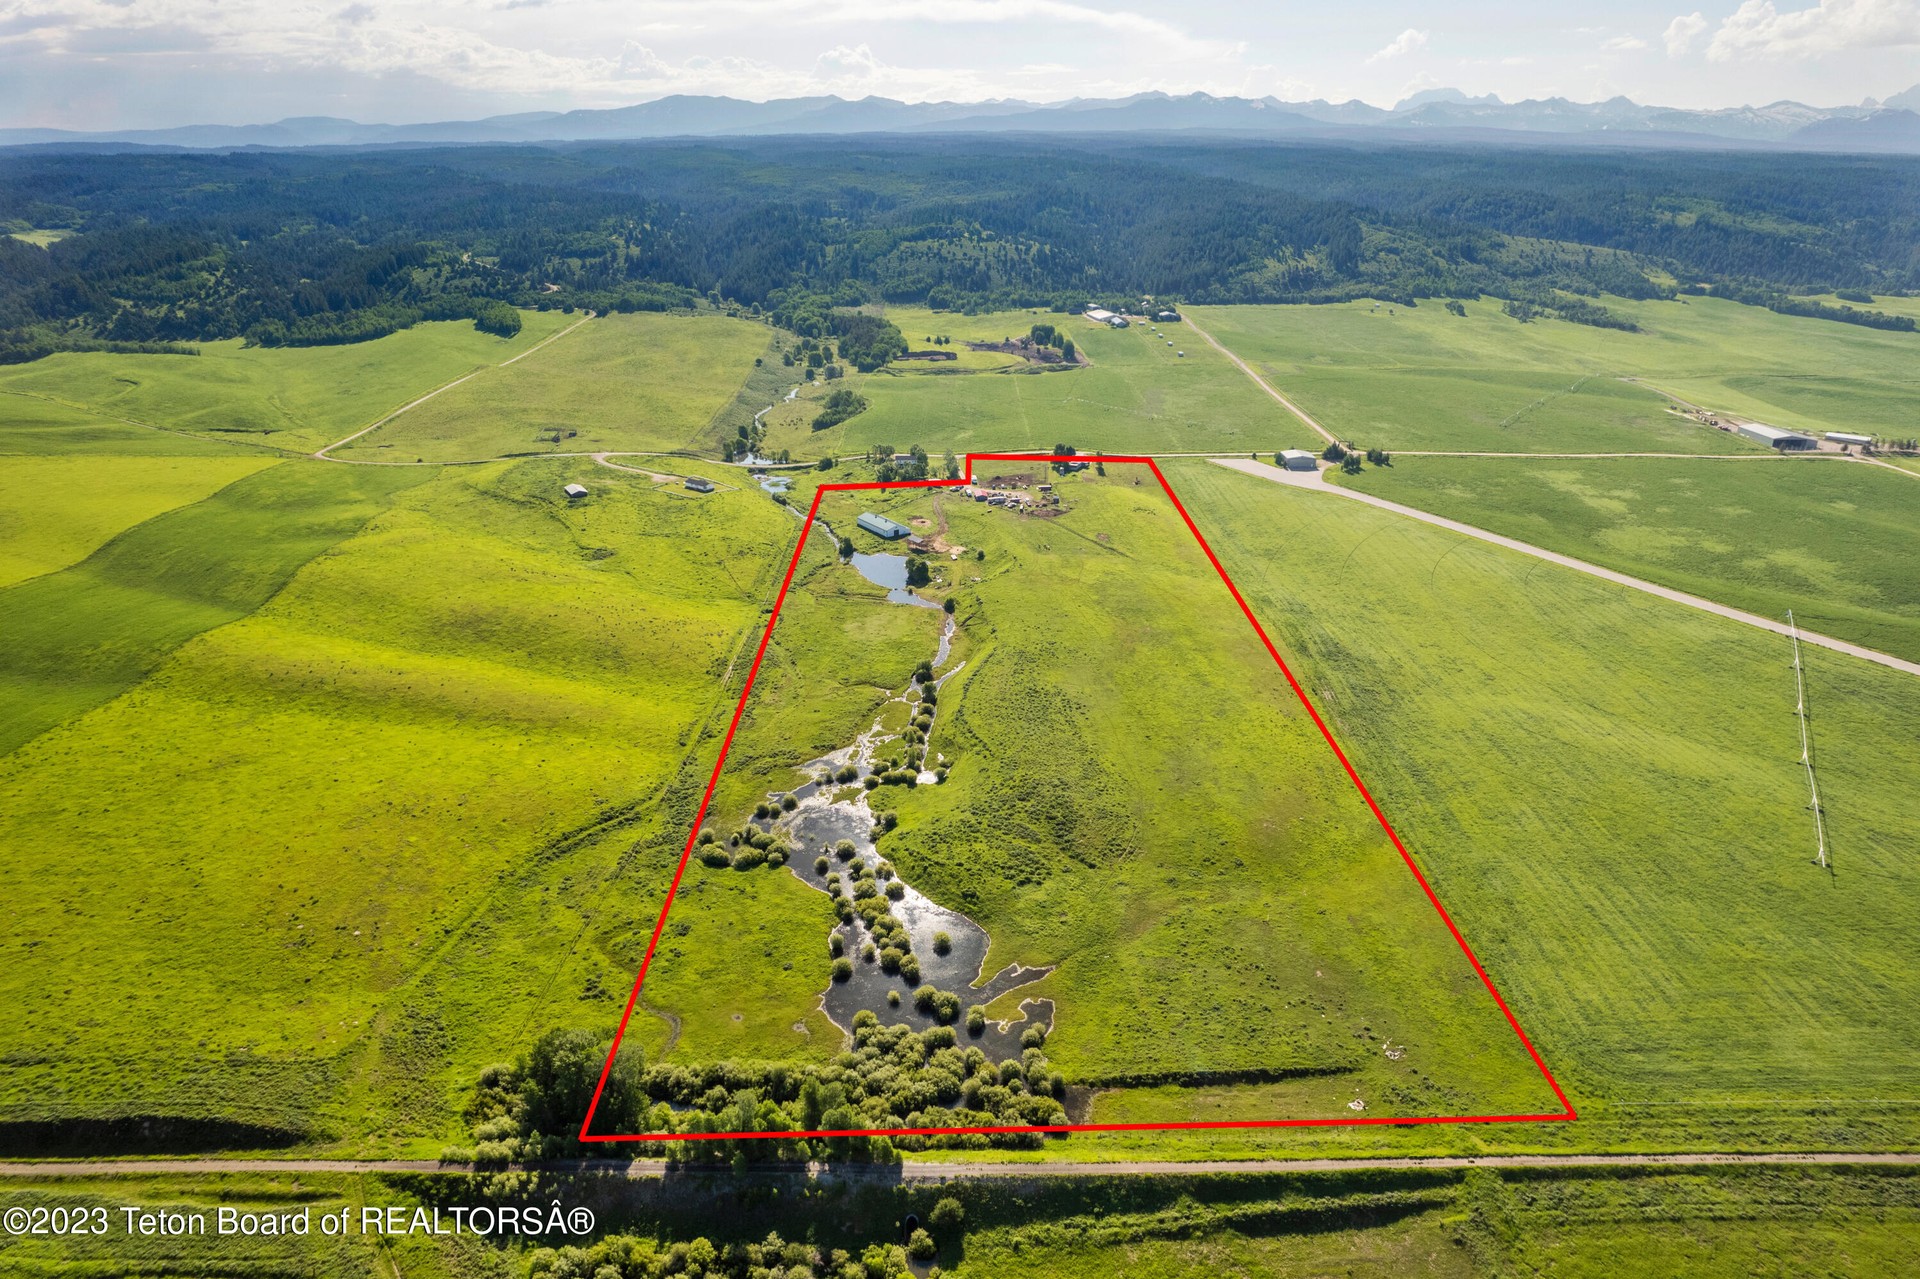 38 spacious acres with exceptional mountain views with 2 Bedroom home